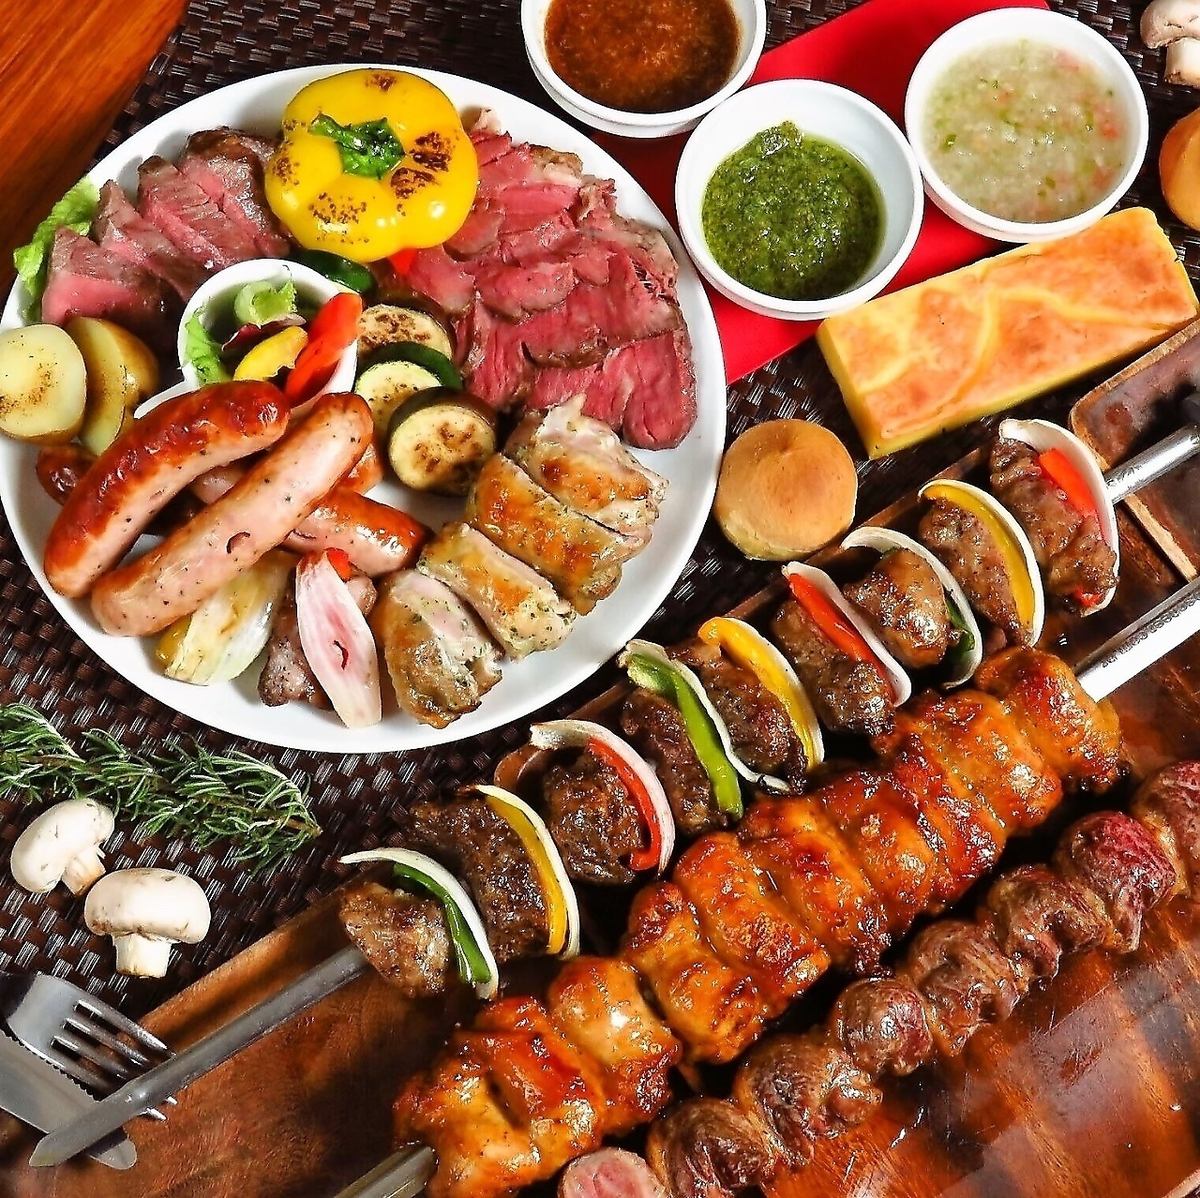 Churrasco party at ALEGRIA! Enjoy an all-you-can-eat meal